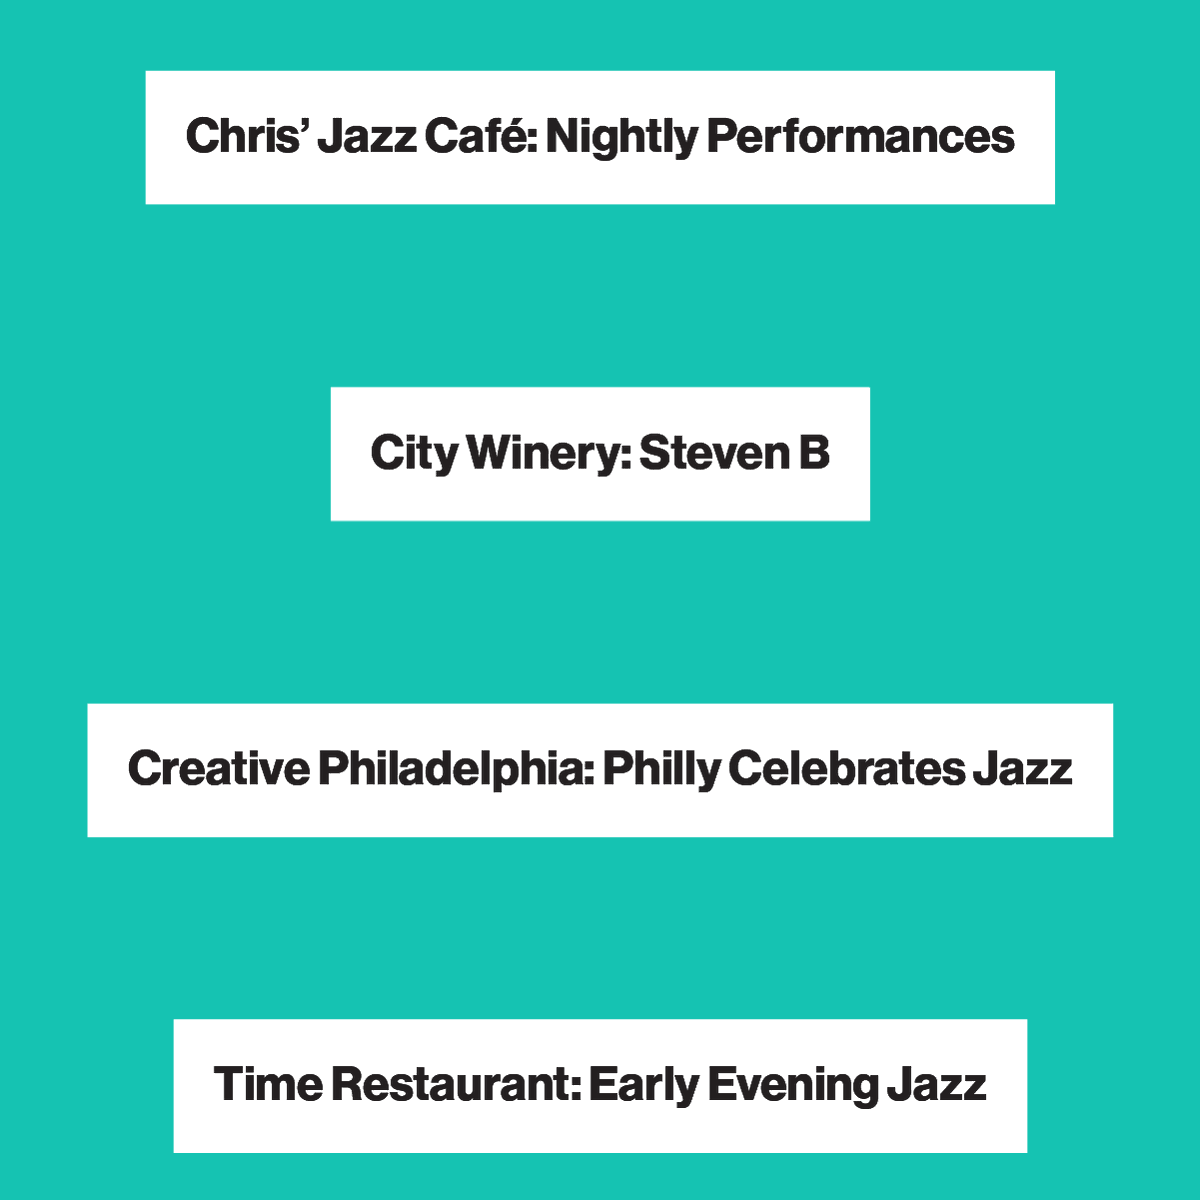 🎷 #JazzAppreciationMonth is in full 'swing' in #CenterCity. Enjoy the jazz scene with live music by visiting one of the many venues in Center City. See below for details and visit the link for more details: bit.ly/3JbI0i9